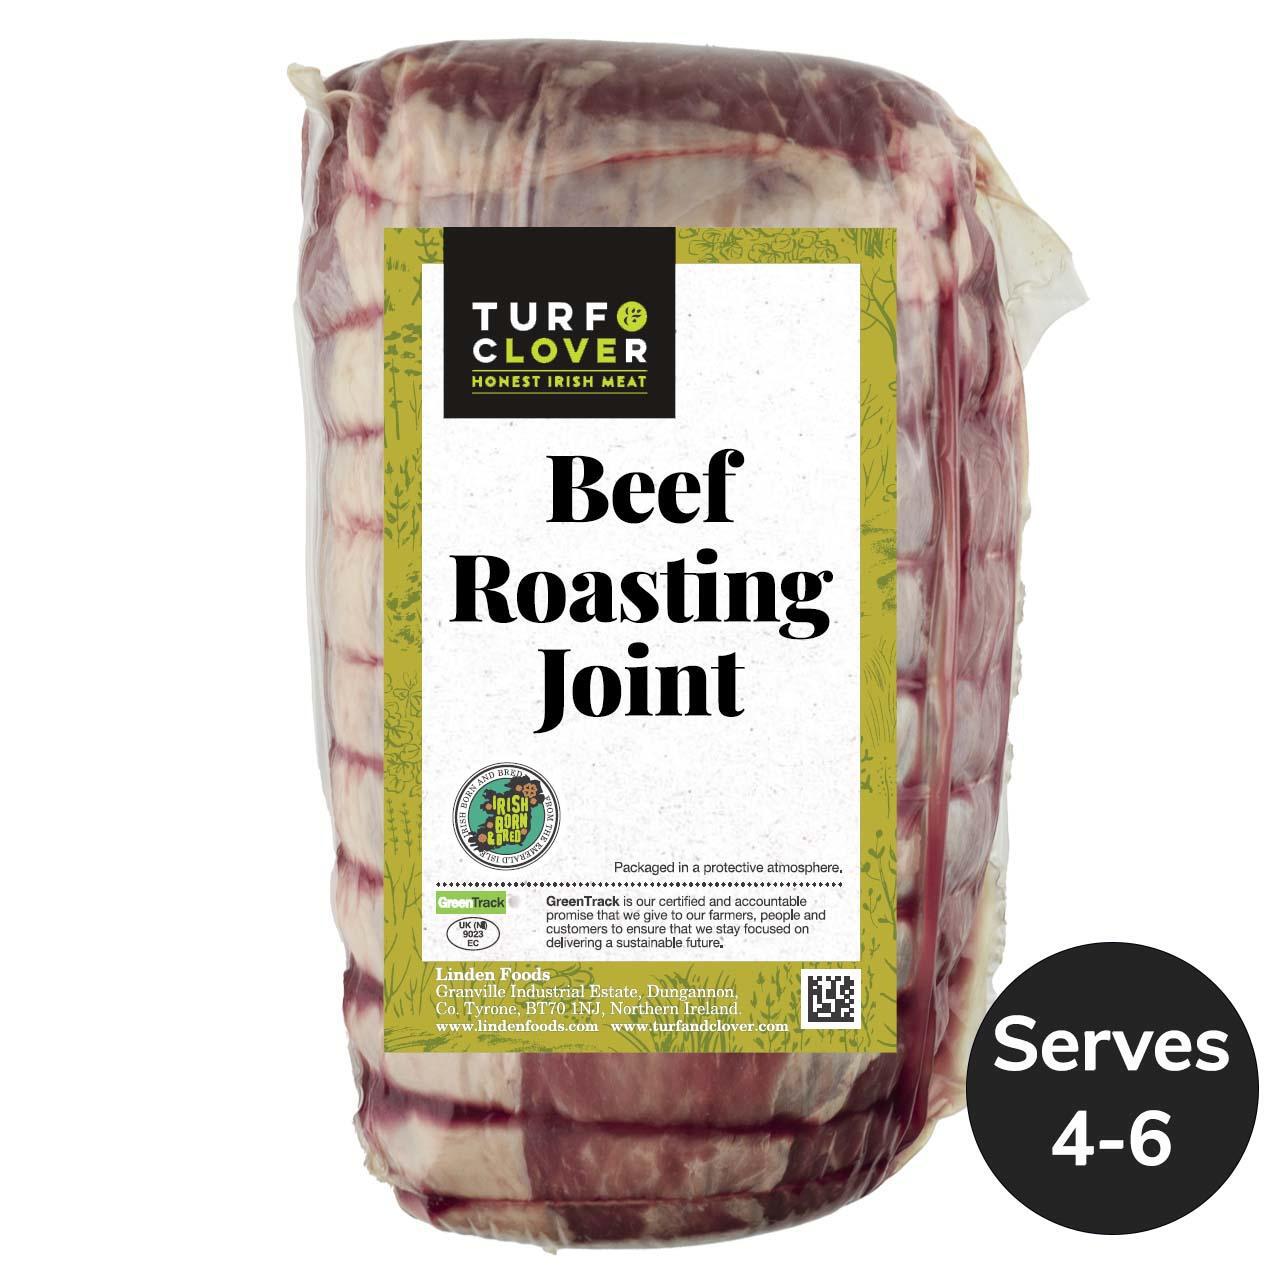 Turf & Clover Large Beef Roasting Joint Typically: 1300g